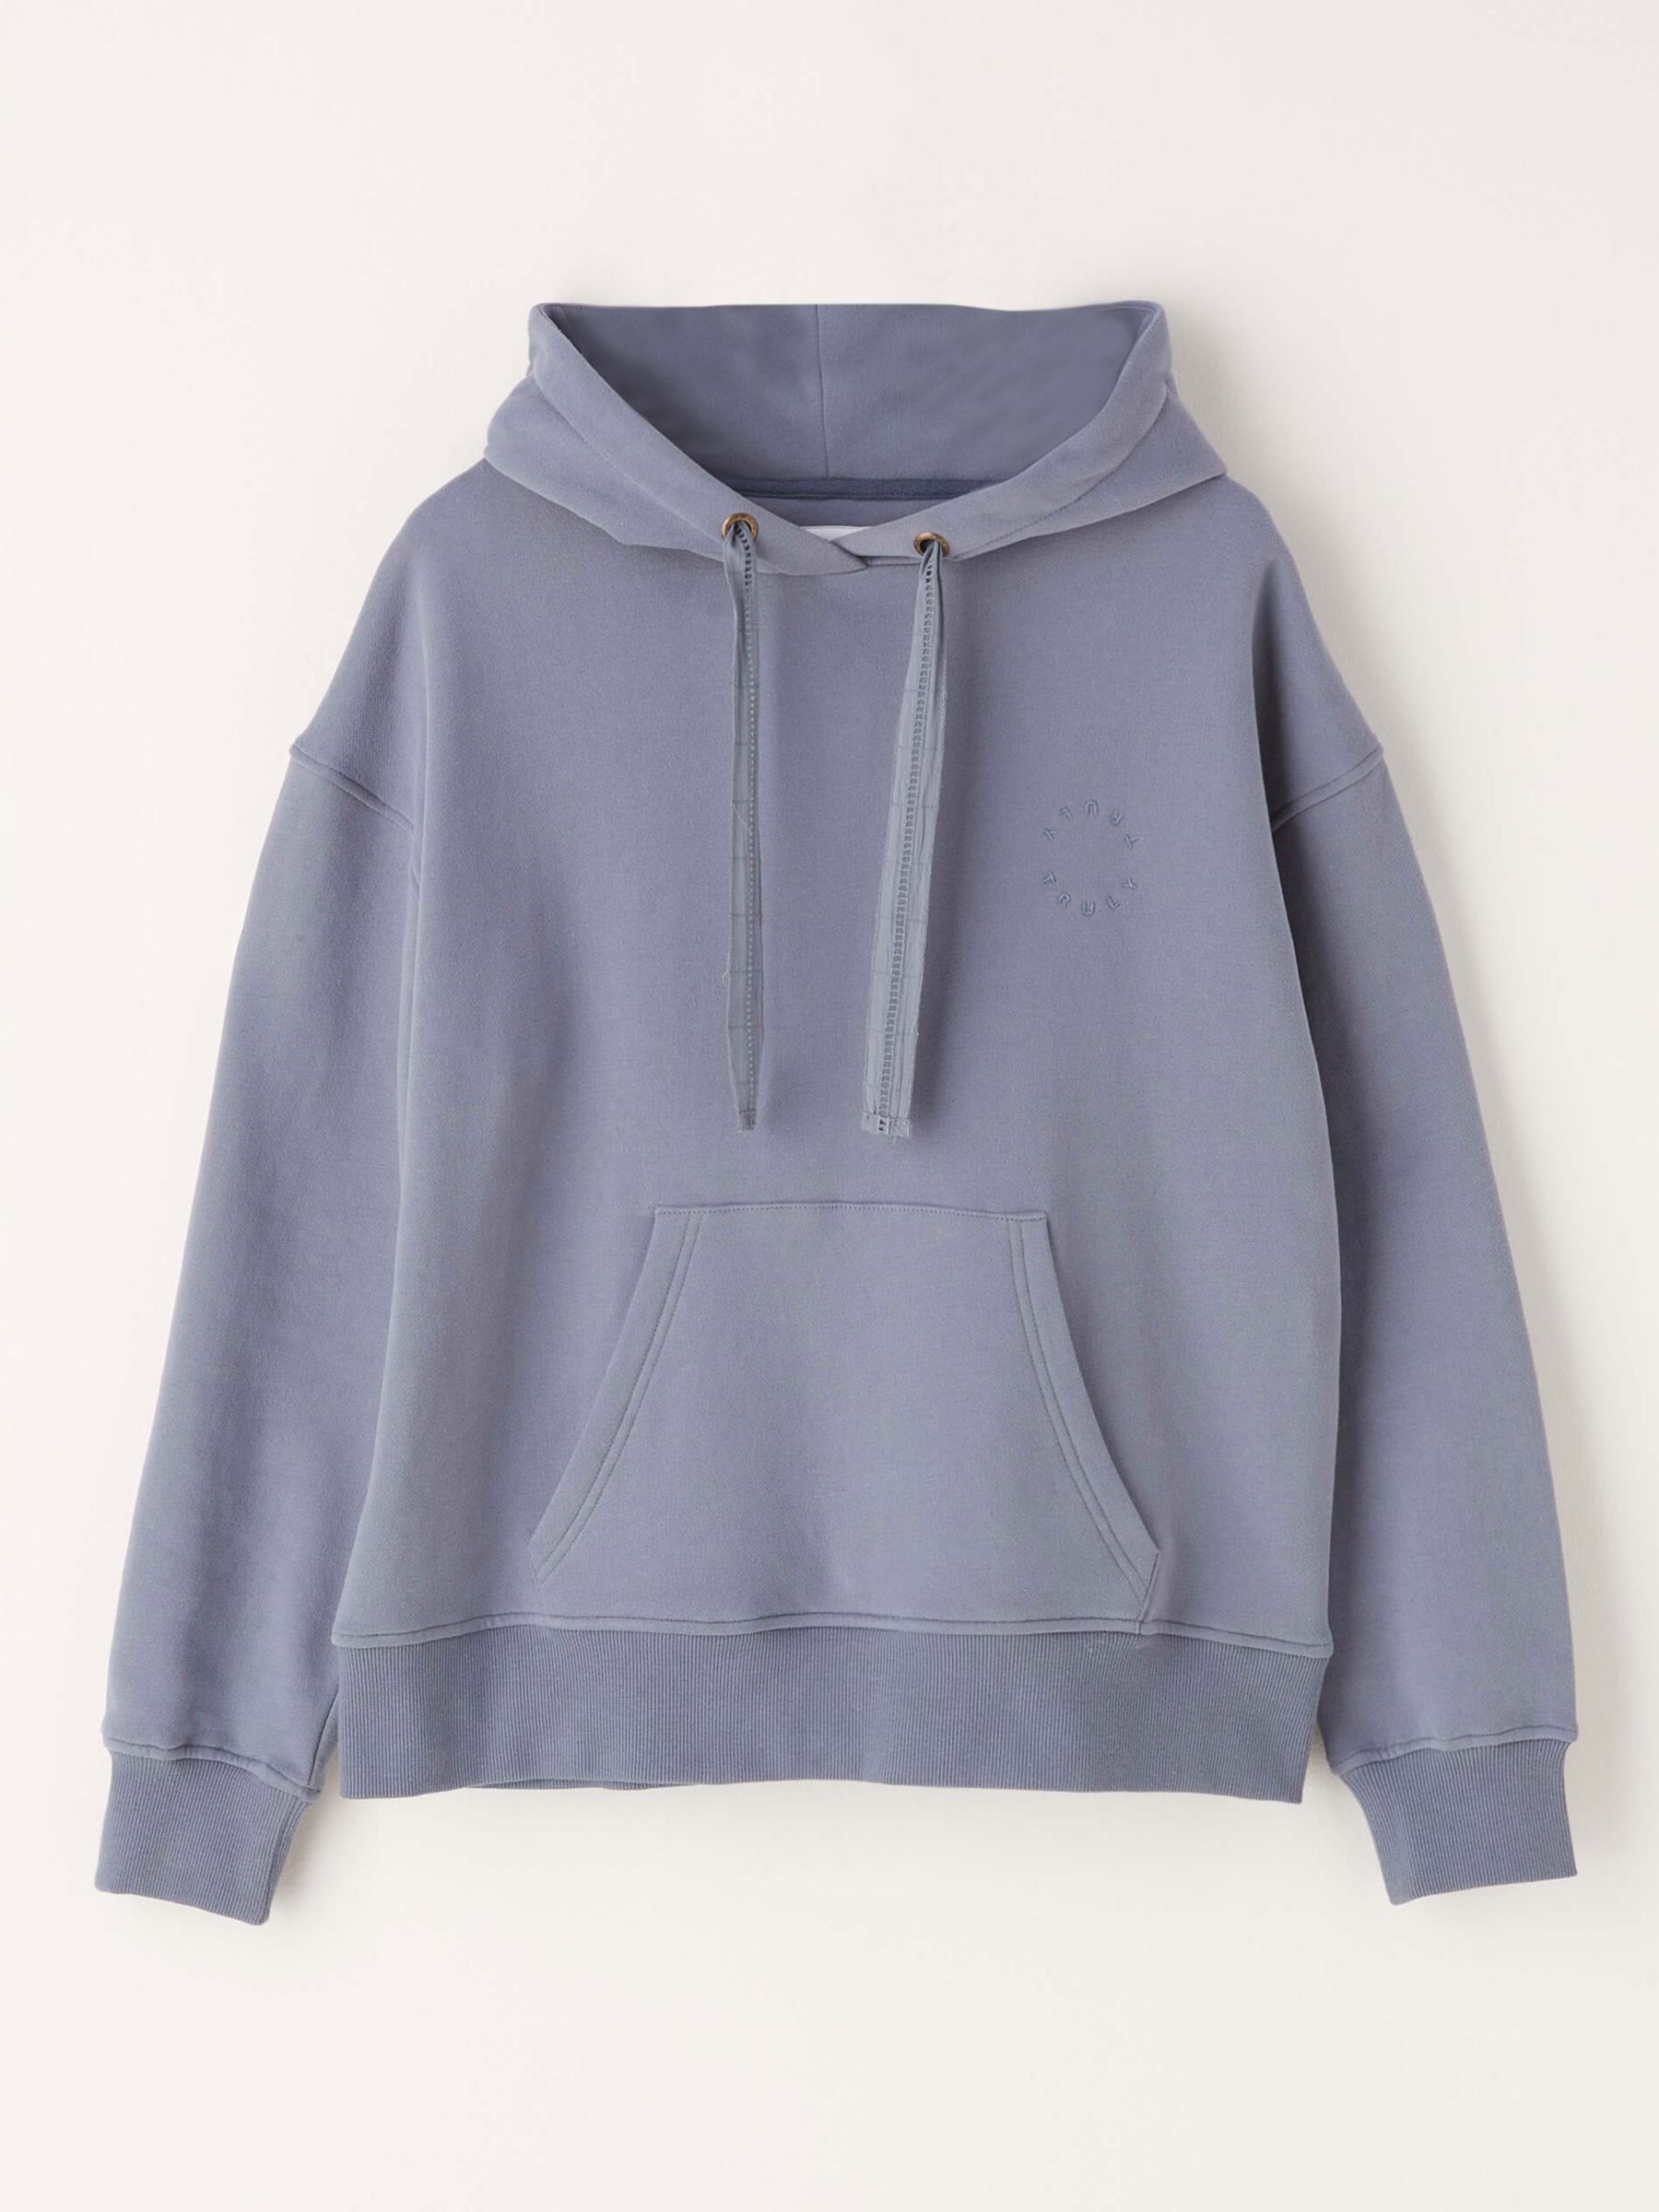 Truly Henley Organic Cotton Hoodie, Navy at John Lewis & Partners